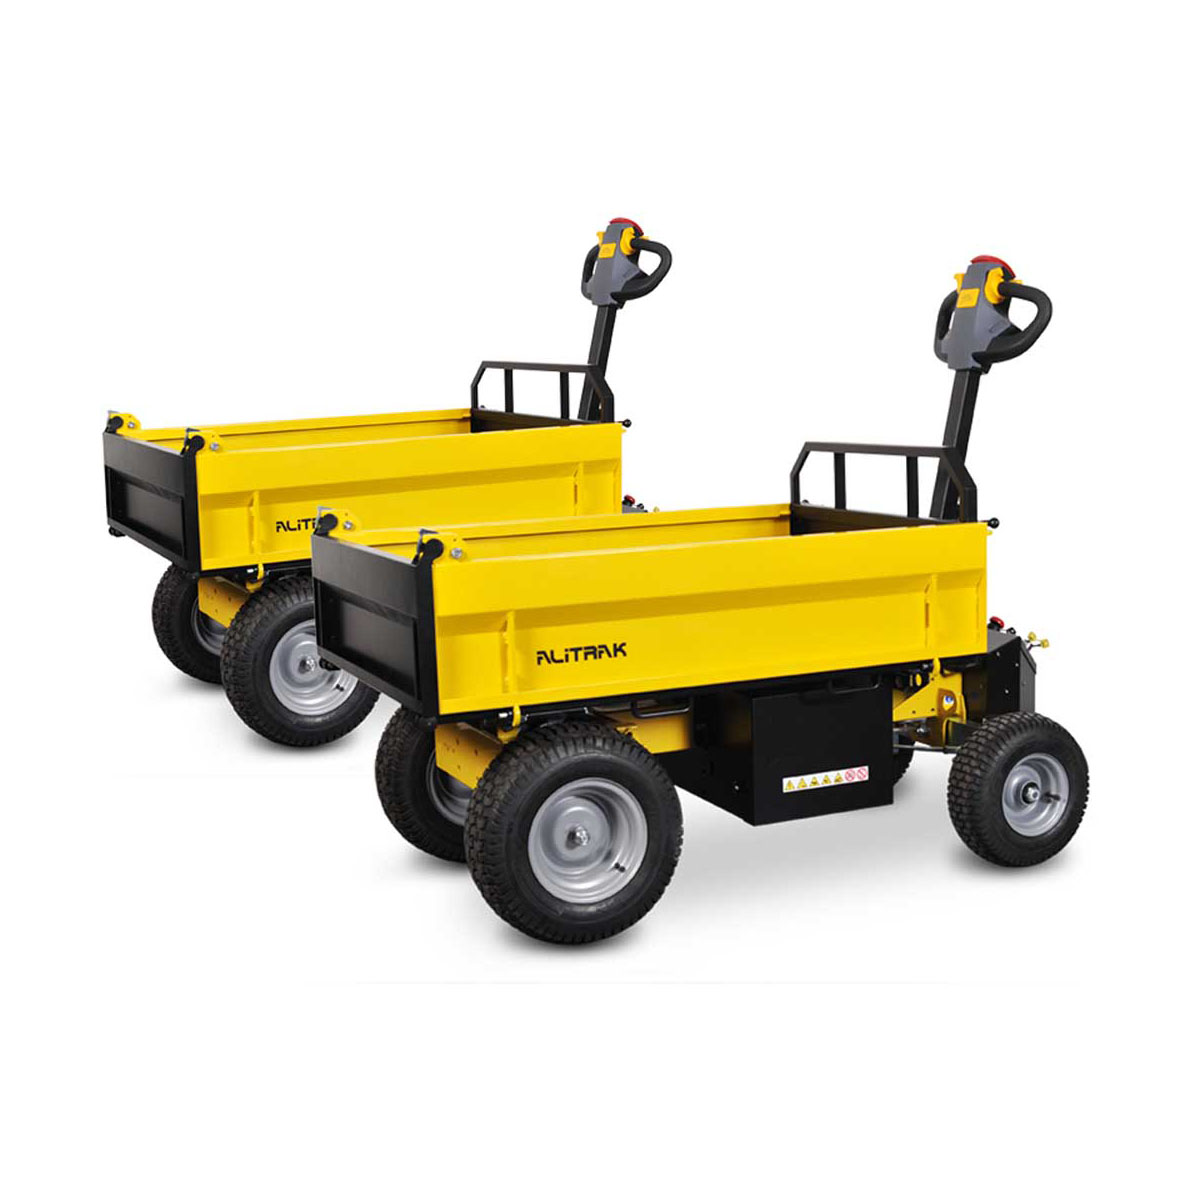 Buy Electric Transporter - Flatbed in Electric Transporter from Alitrak available at Astrolift NZ